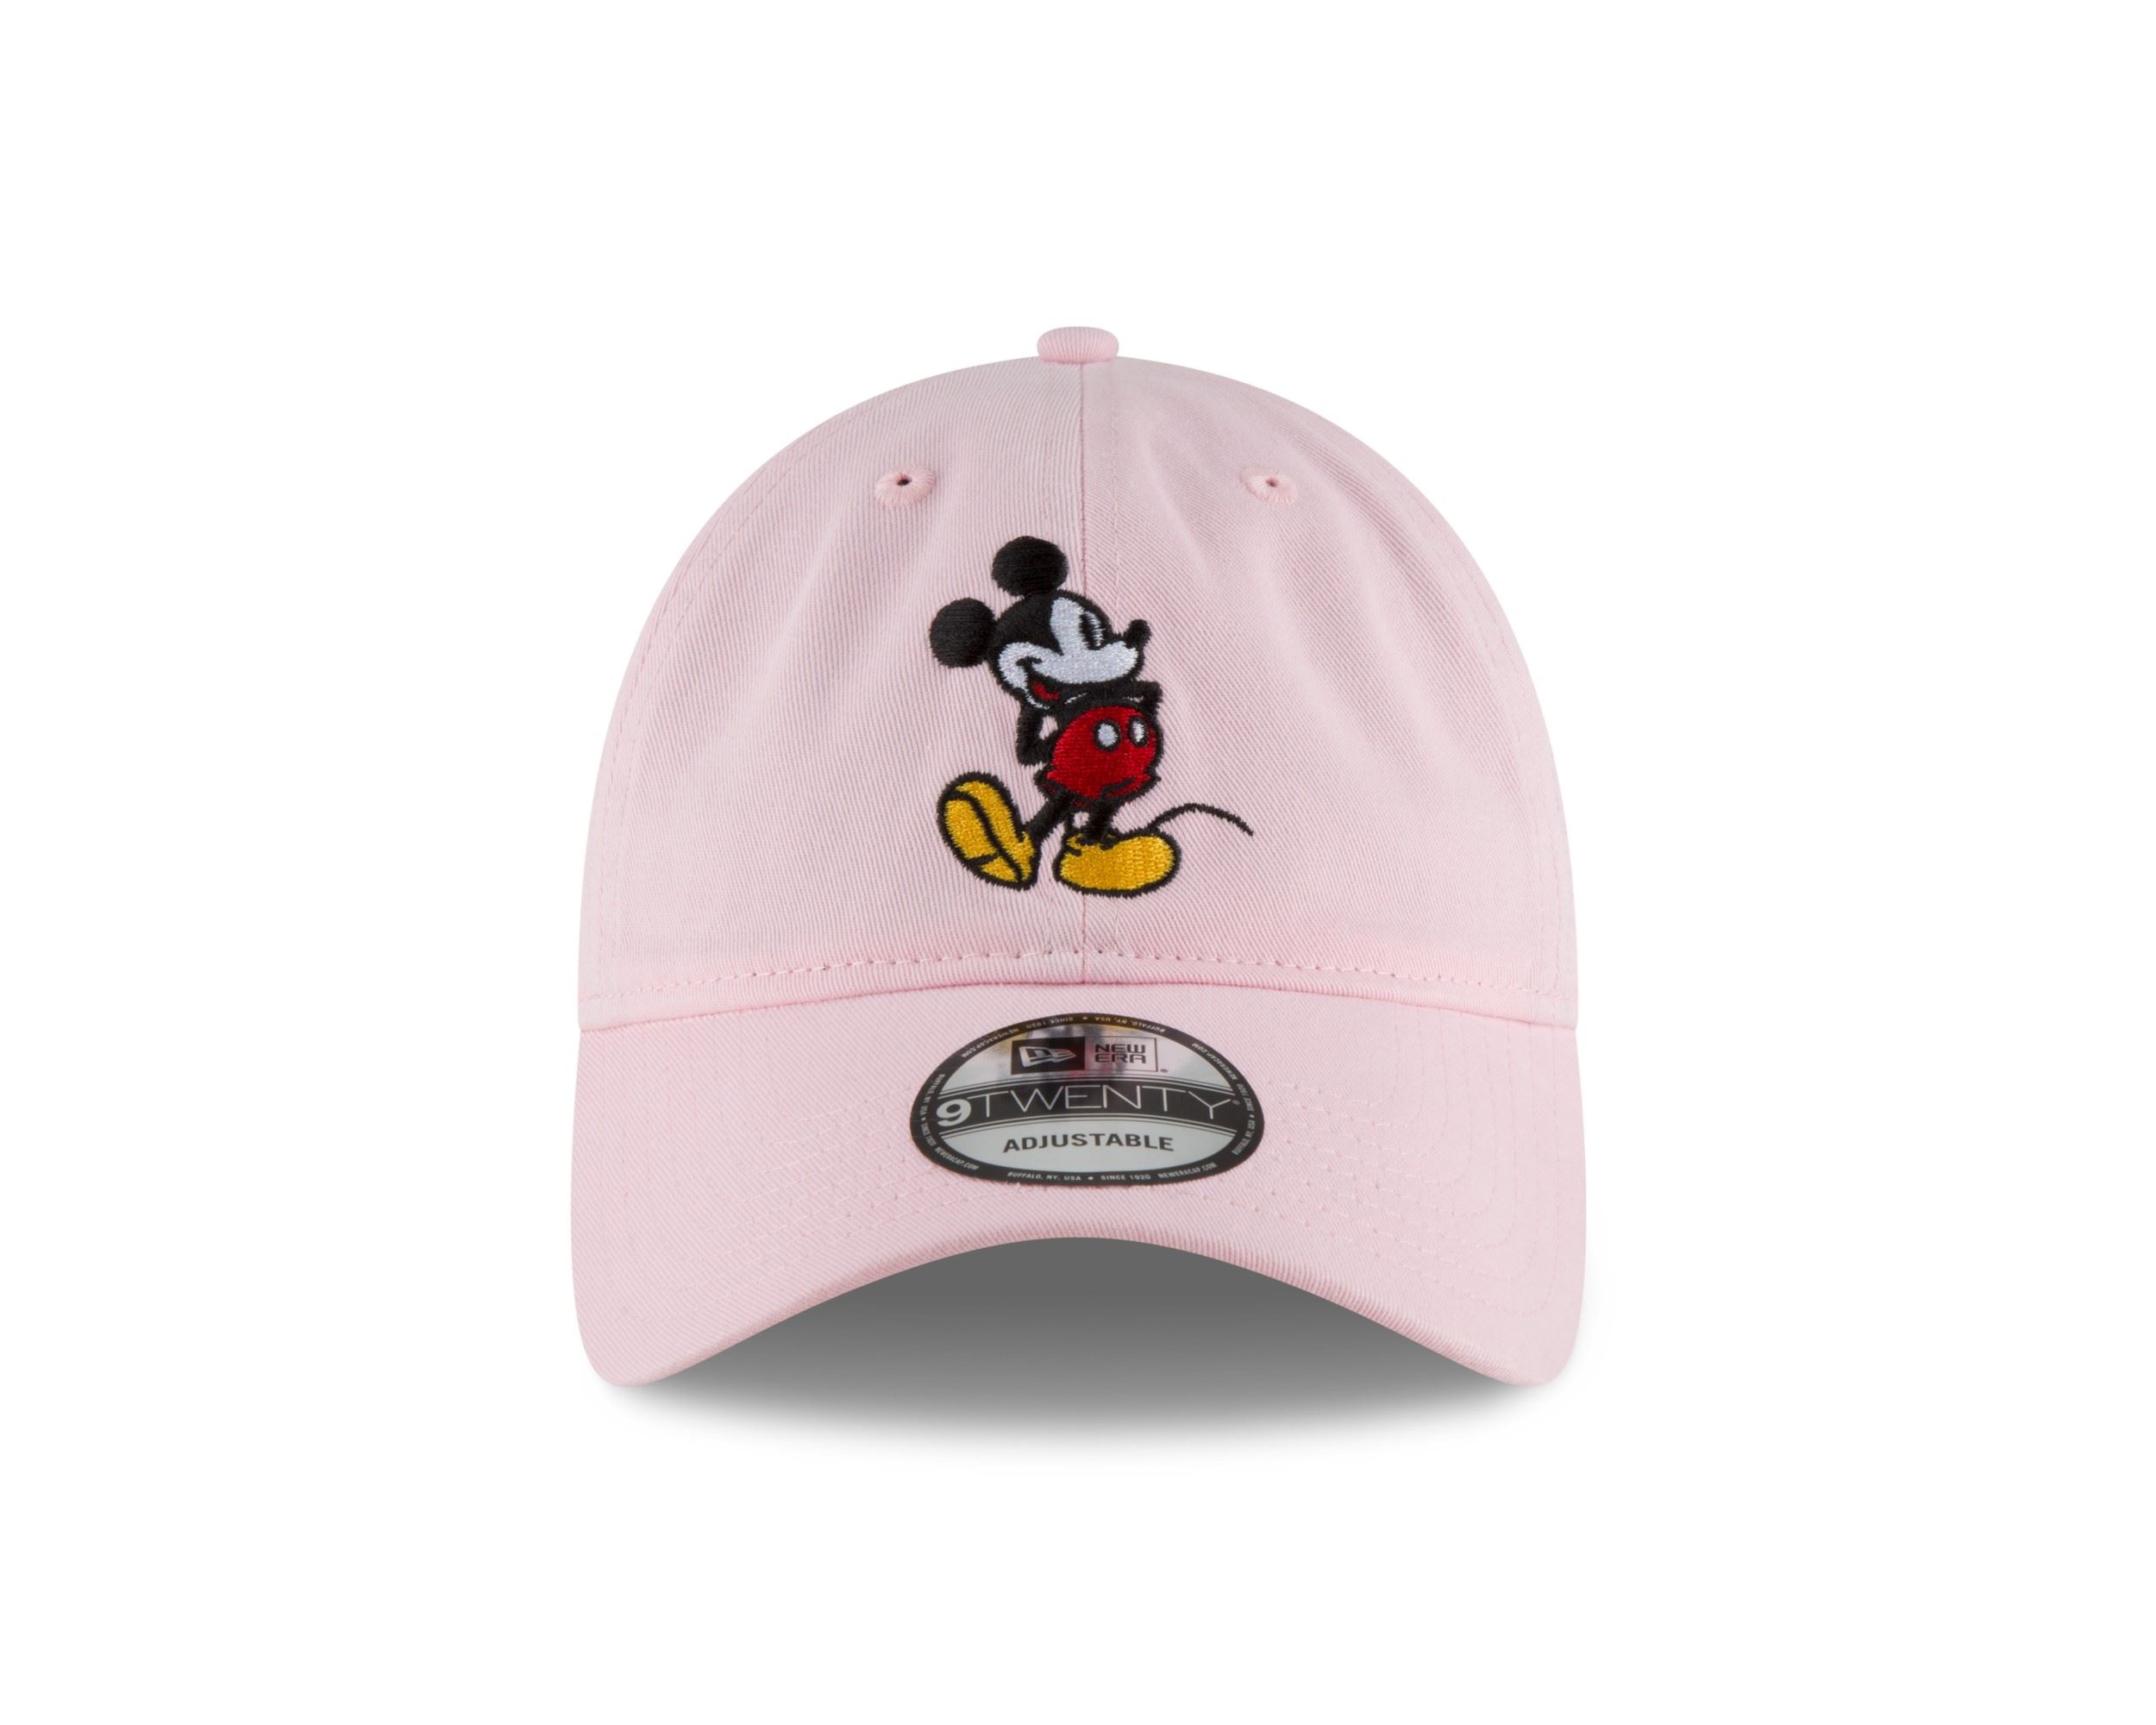 Mickey Mouse Characater Pink 9Twenty Unstructured Strapback Cap New Era